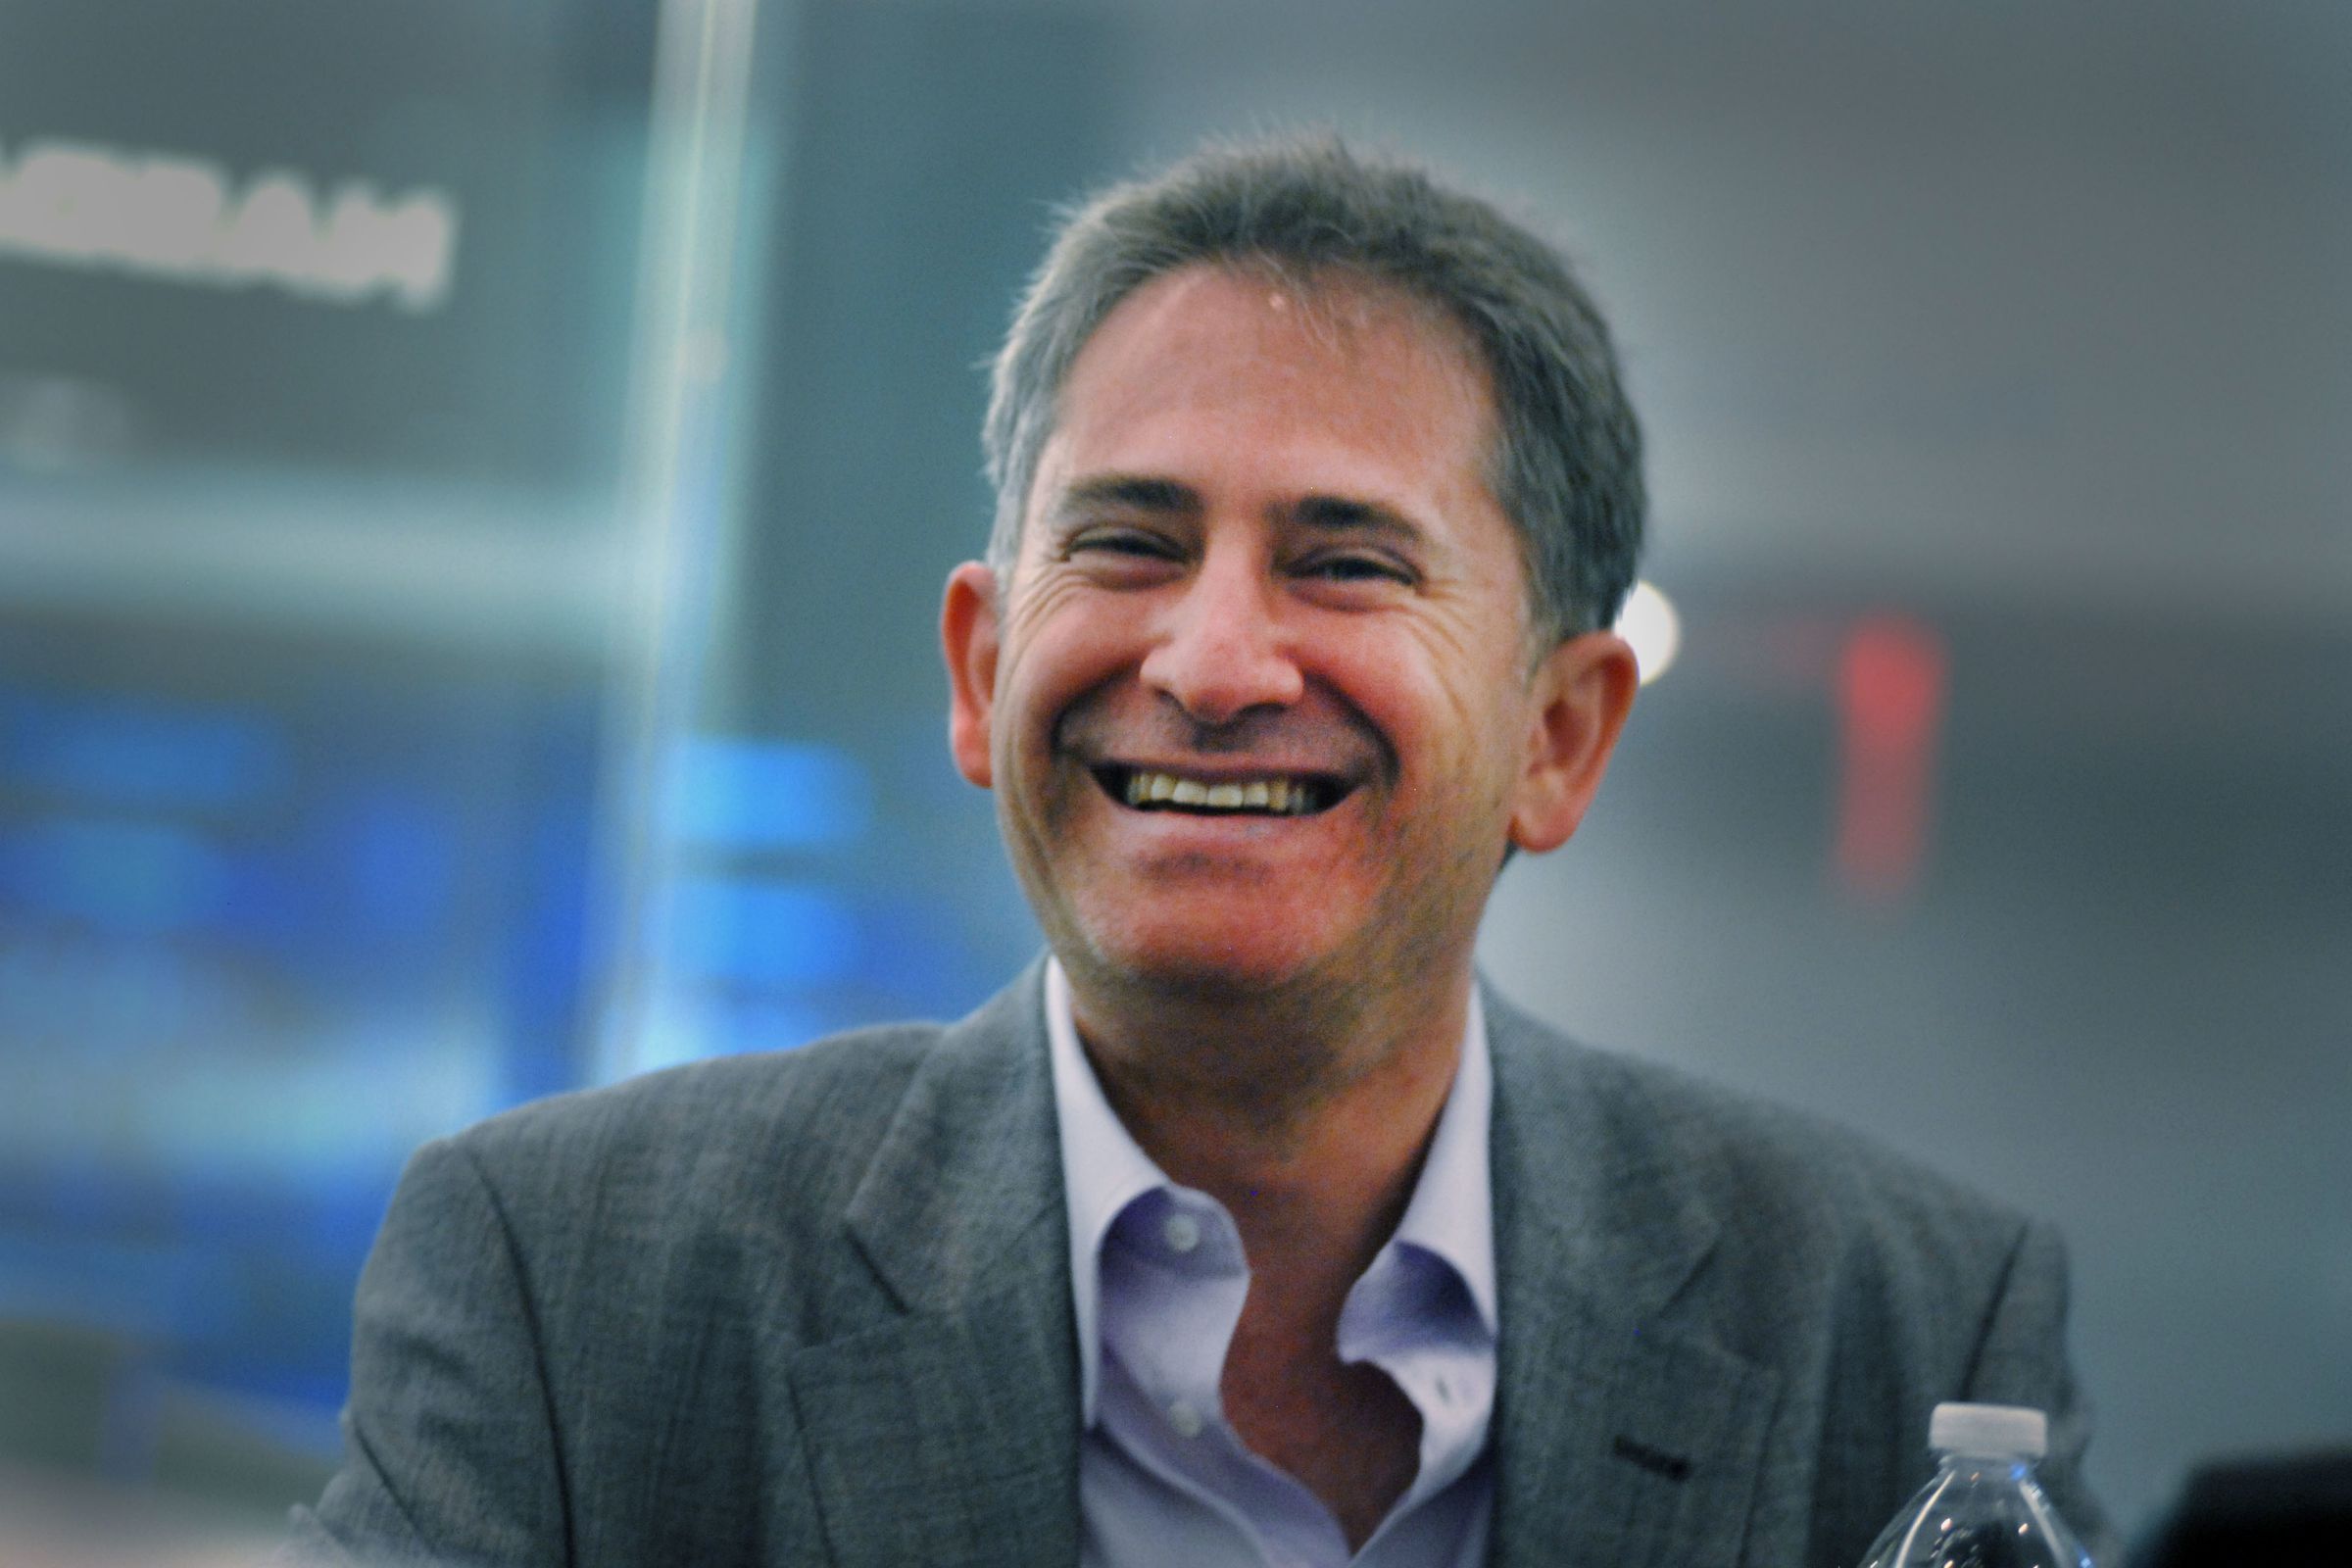 USA - Business - Blizzard Entertainment Mike Morhaime CEO